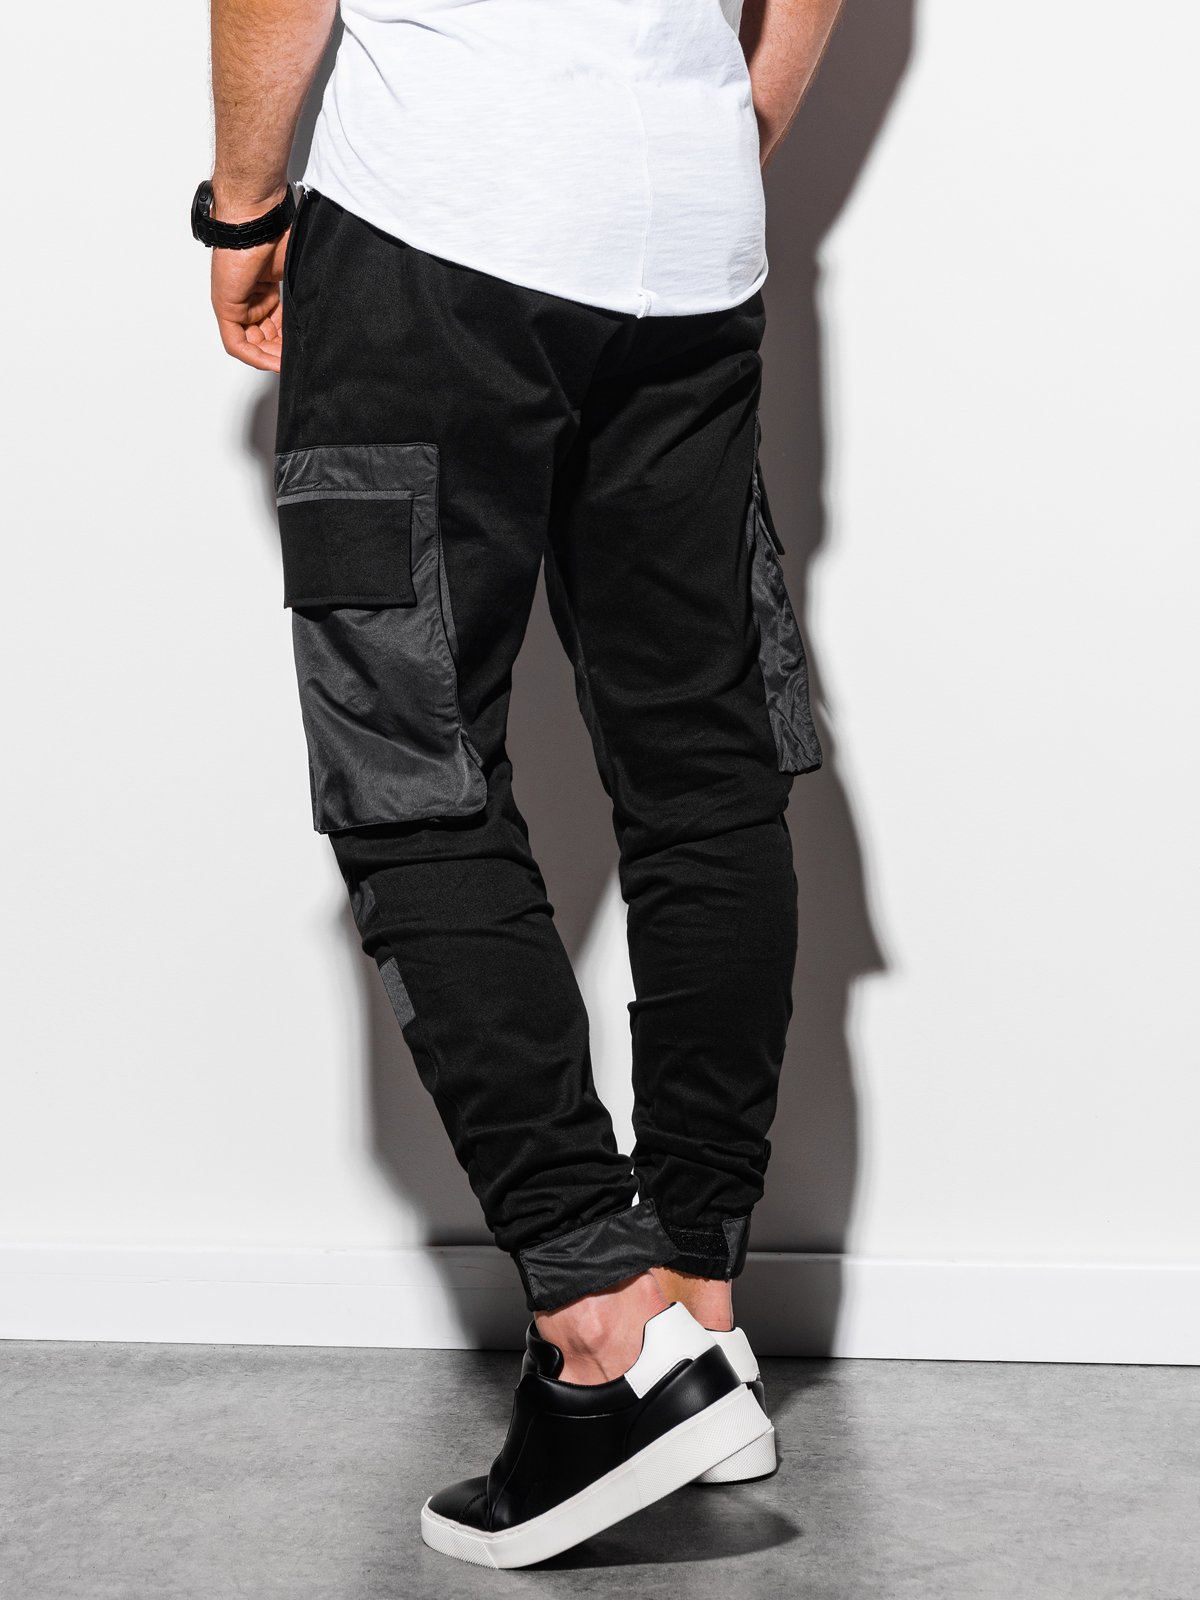 MEN鈥橲 JOGGERS, Fashion Bug, Online Clothing Stores